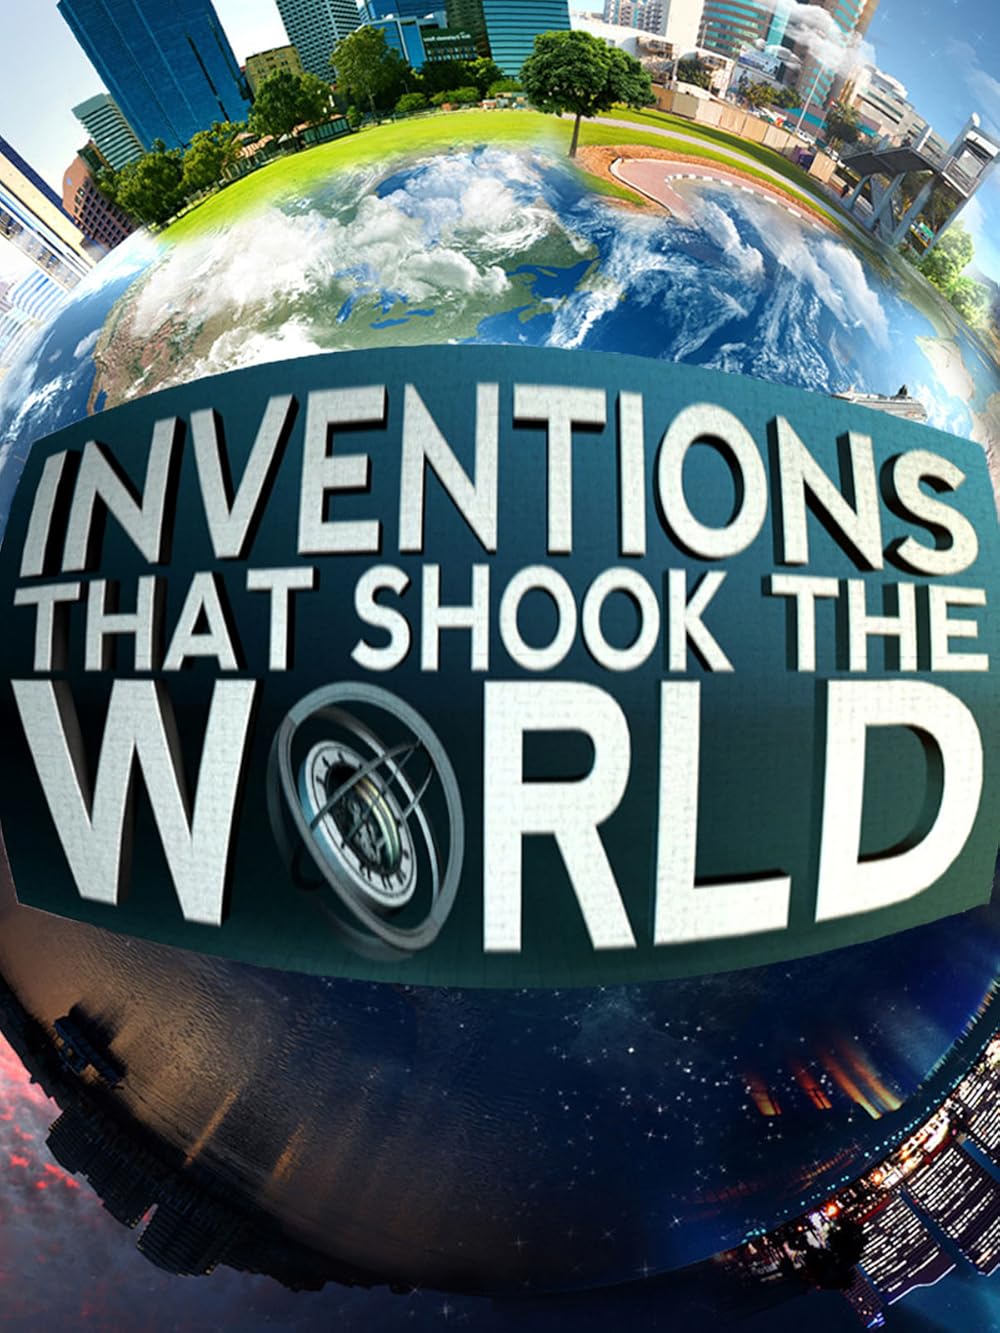 Inventions That Shook the World (2011)